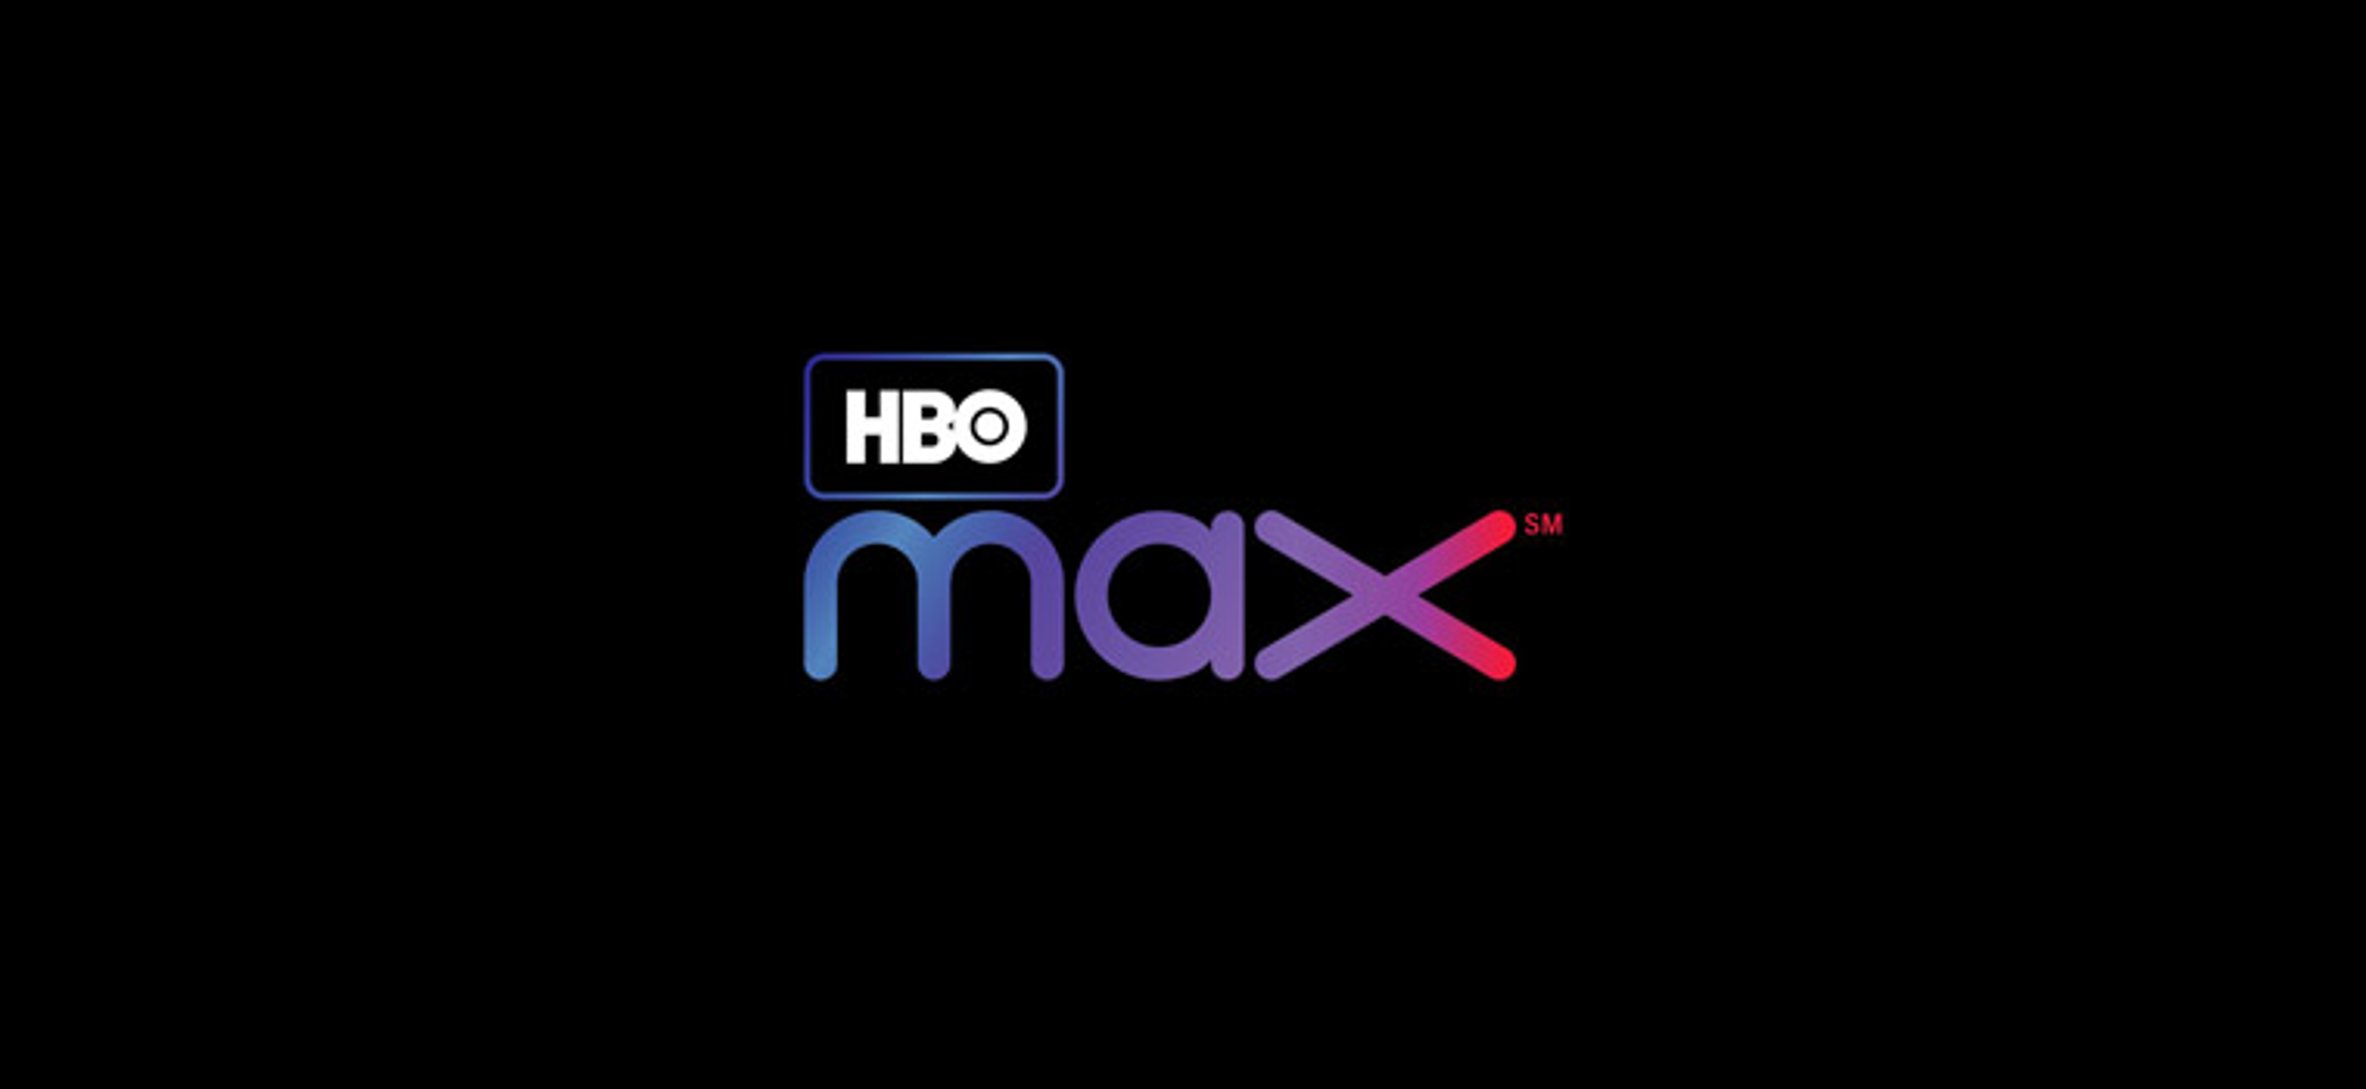 Casting HBO Max's First Dates Hotel!